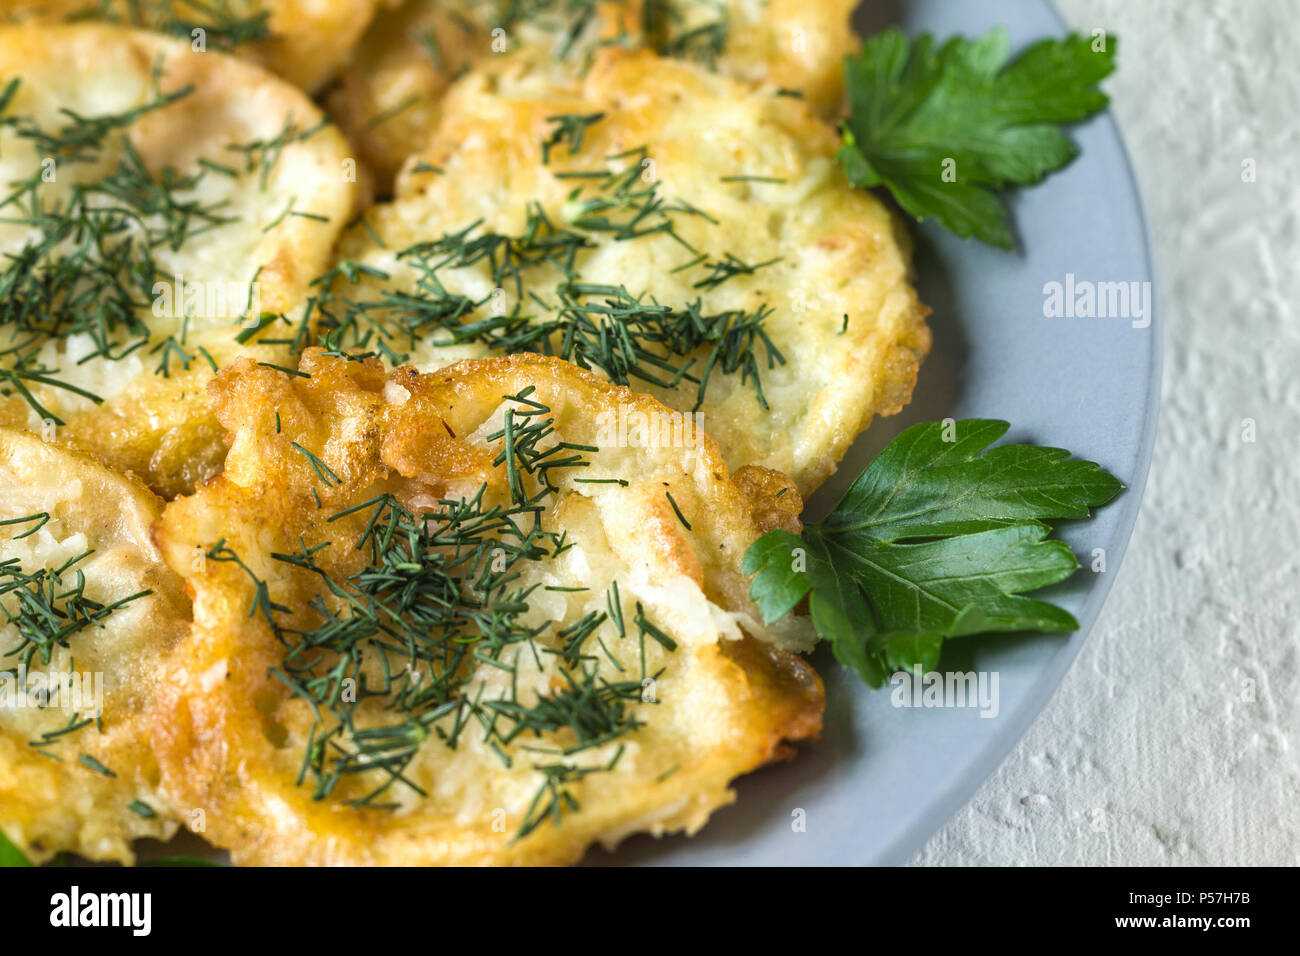 Roasted (fried) slices zucchini in egg batter with garlic Stock Photo